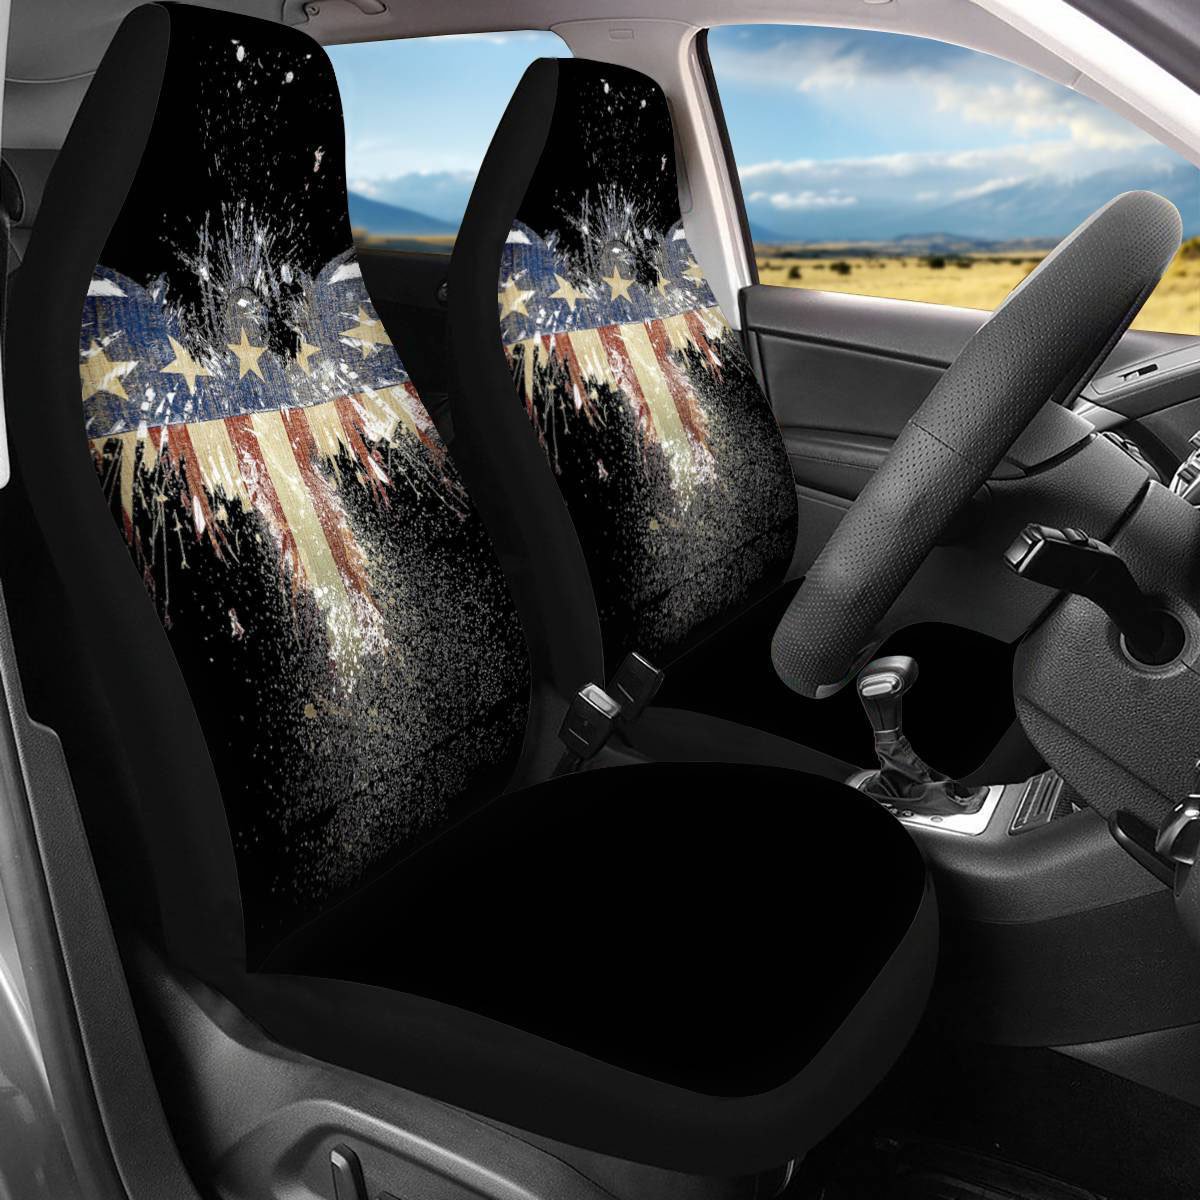 2 Pieces Wearproof Dirt-proof Easy to Clean Front Single Car Seat Covers National Flag Summer Cooling Four Seasons Car Seat Covers for Front Two Seats Comes with 2 Pieces - Honeycomb Cloth